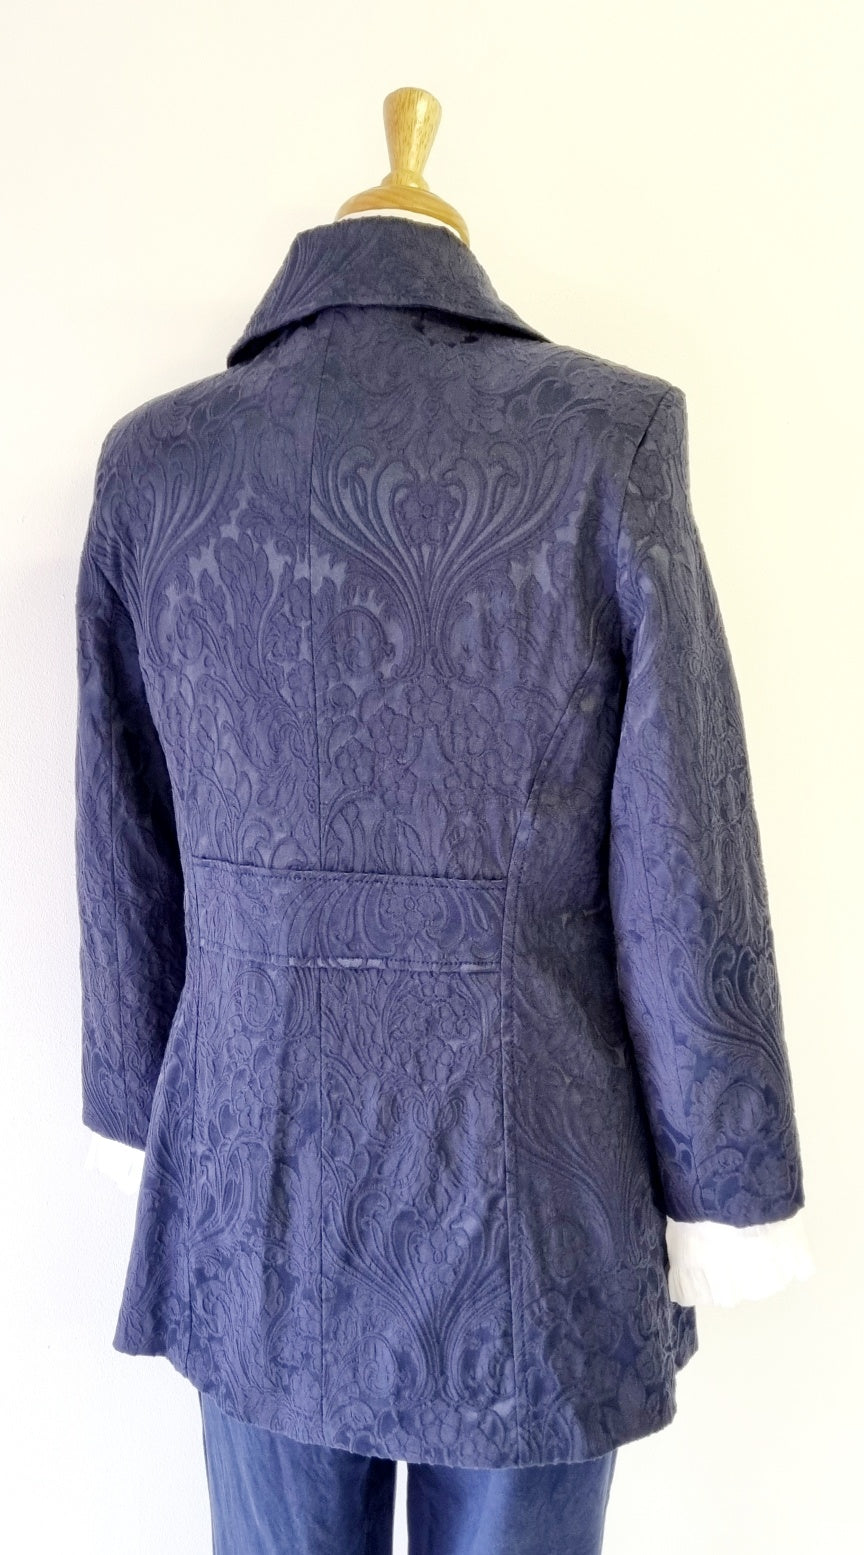 Studio w - Blue patterned double breasted coat